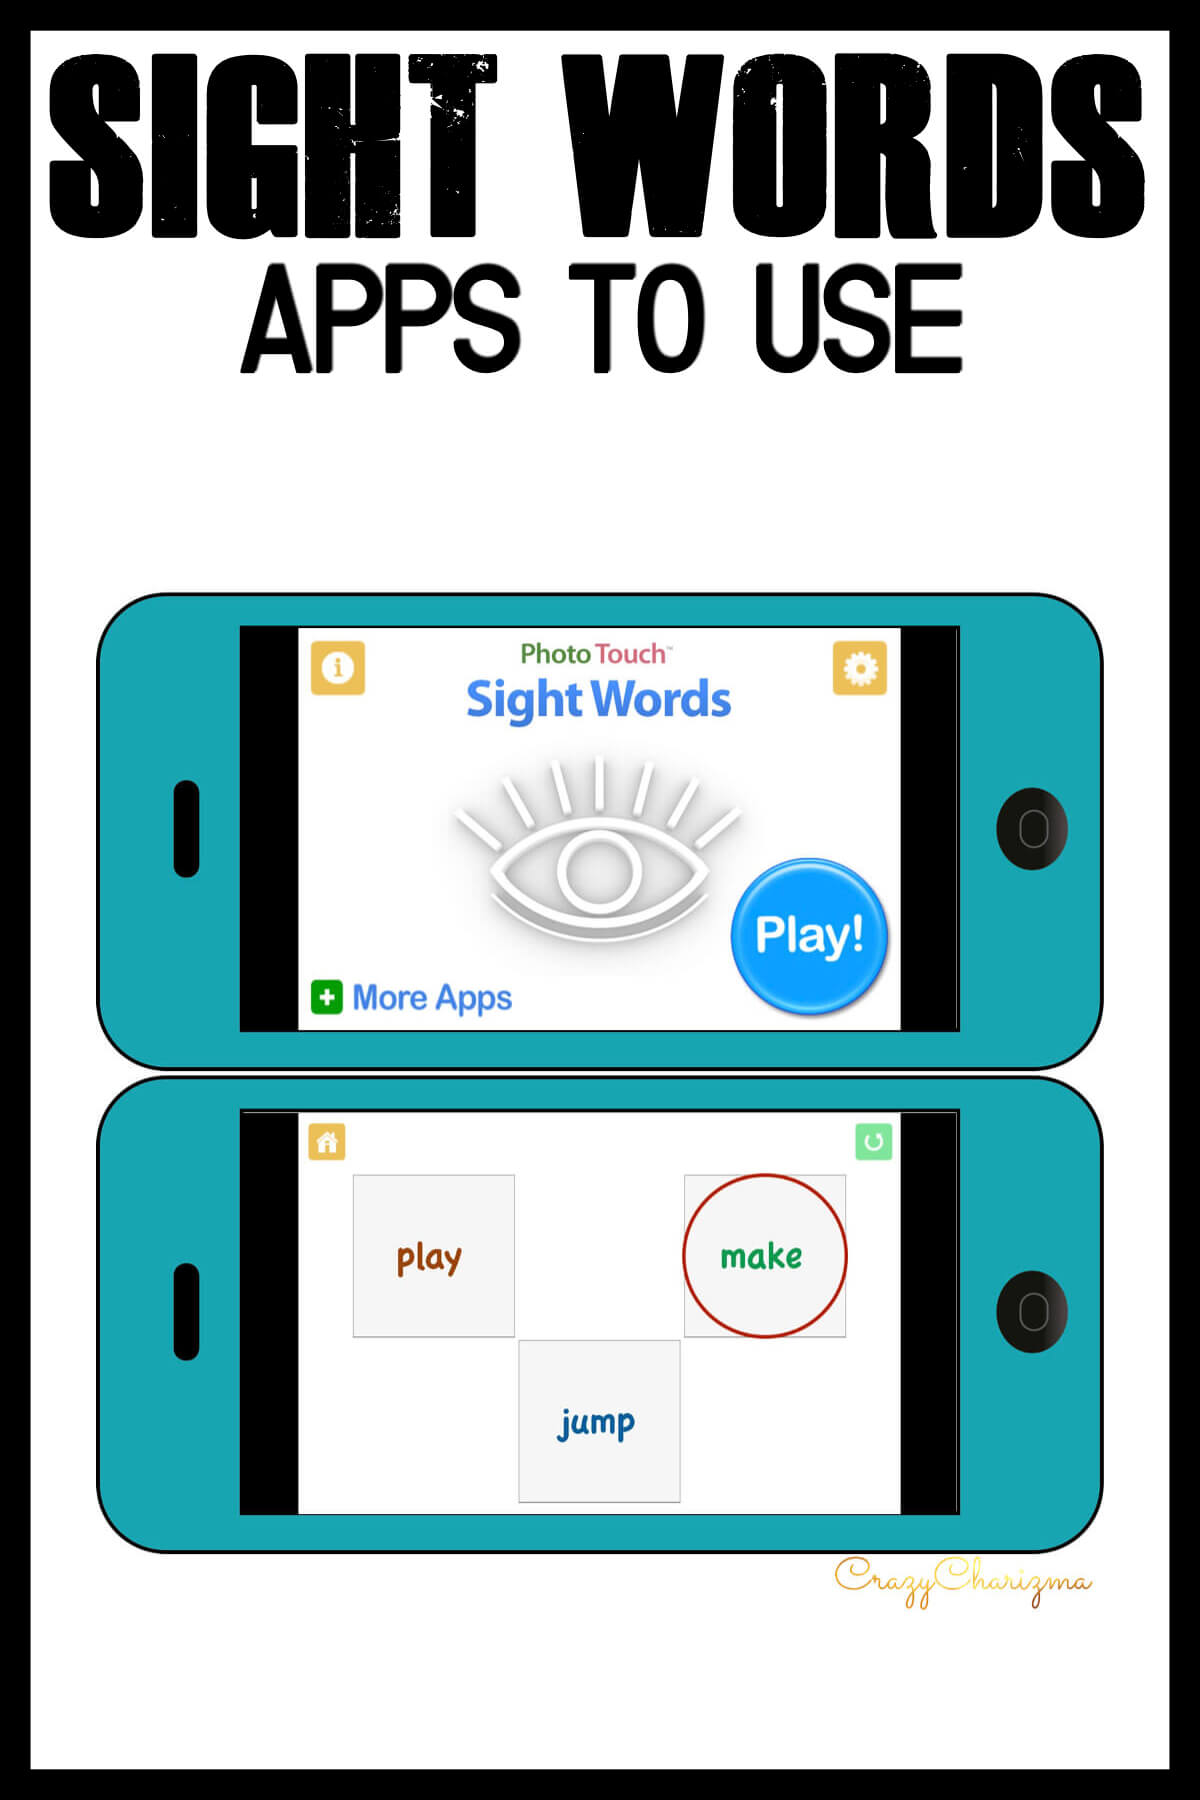 Get the ultimate list to teach SIGHT WORDS with fun sight word games and worksheets! Use technology and apps. Explore sensory activities. Enjoy reading games and writing practice!